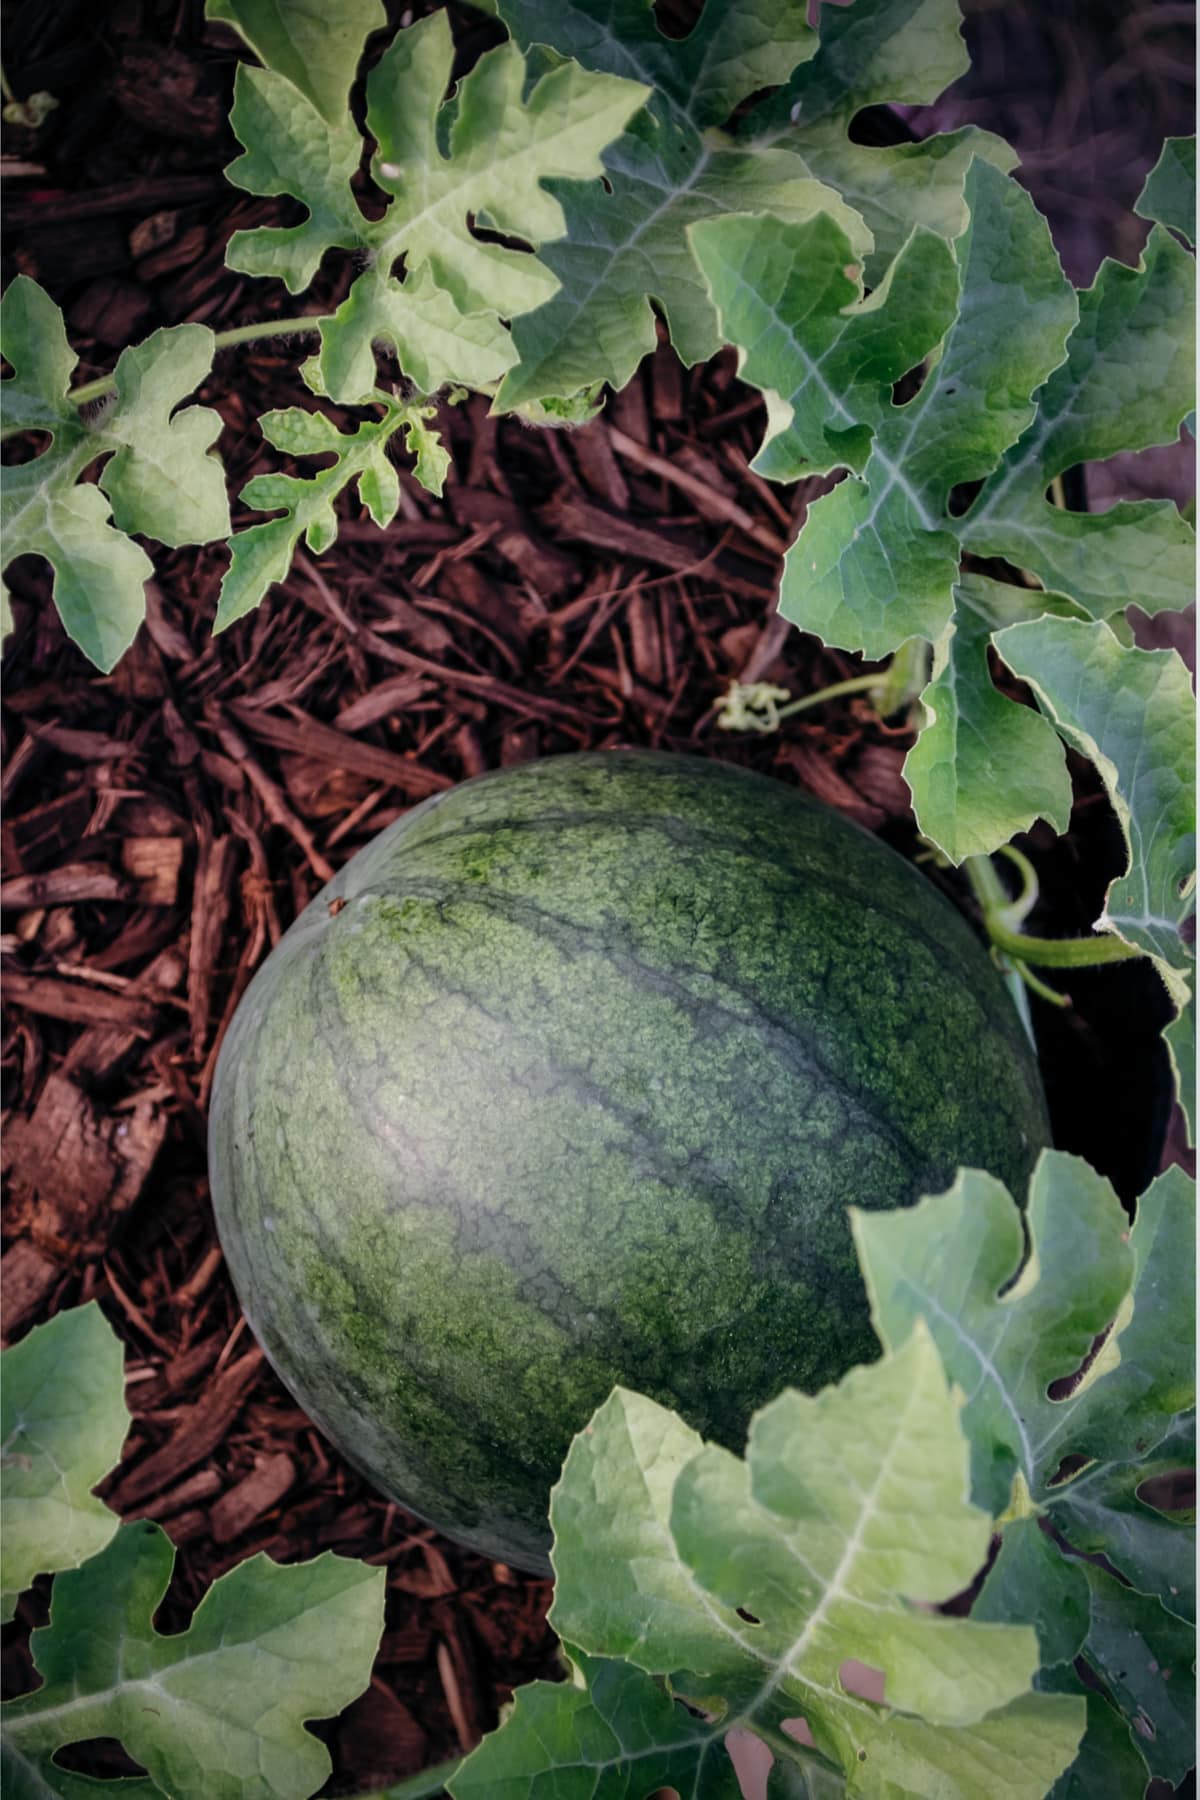 Large deep green watermelon with dark green almost black lines. 